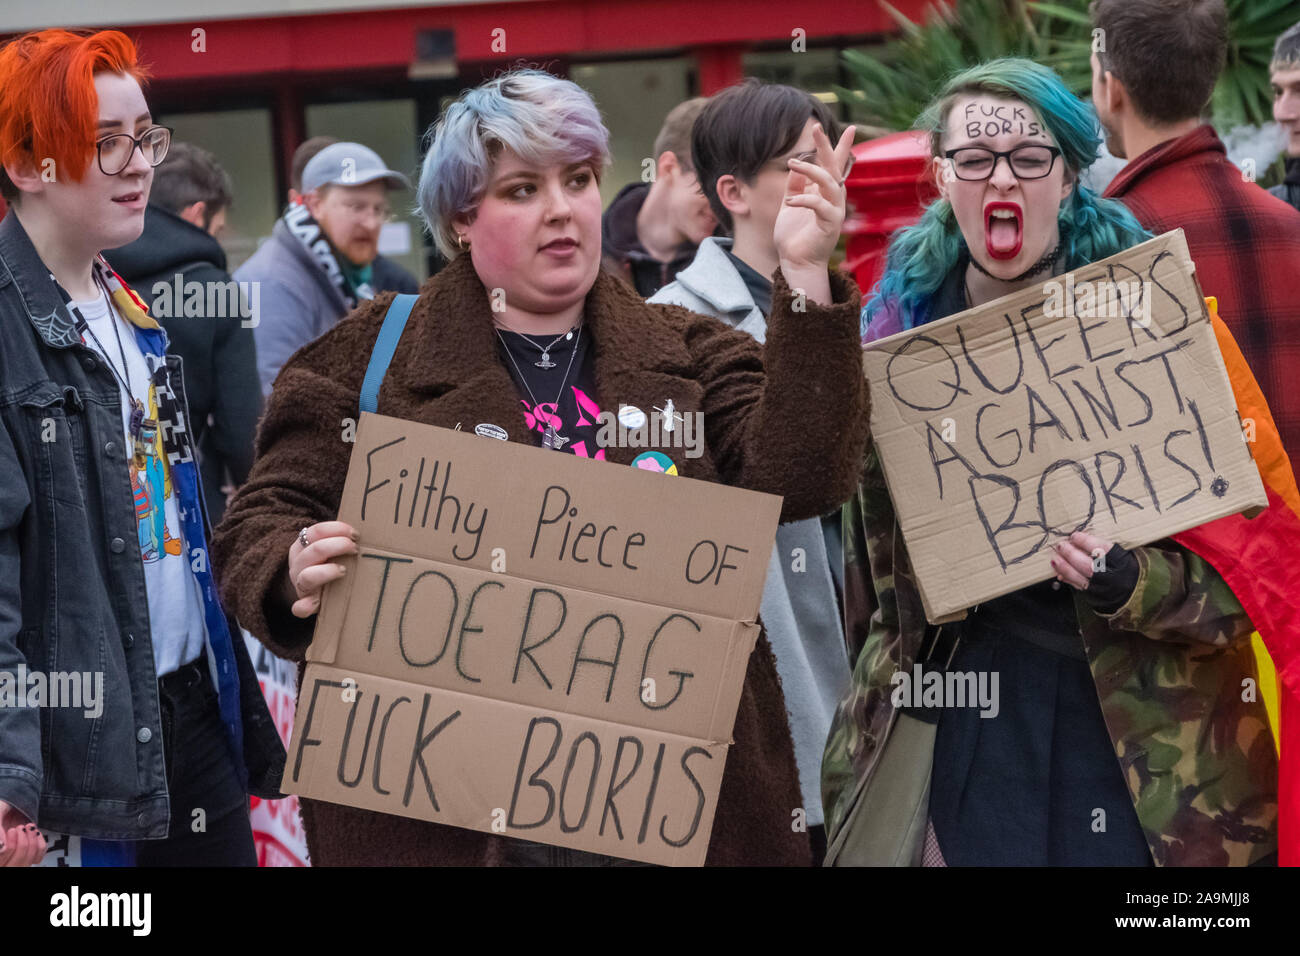 London, UK. 16th November 2019. Gay protesters from FCKBoris at Brunel University in Uxbridge  urging everyone to register and vote against Boris Johnson and kick him out for his racist, elitist politics.  Johnson had a majority of just over 5 thousand in 2017 and Labour candidate Ali Milani has strong hopes of beating him and the other 10 candidates. Peter Marshall/Alamy Live News Stock Photo